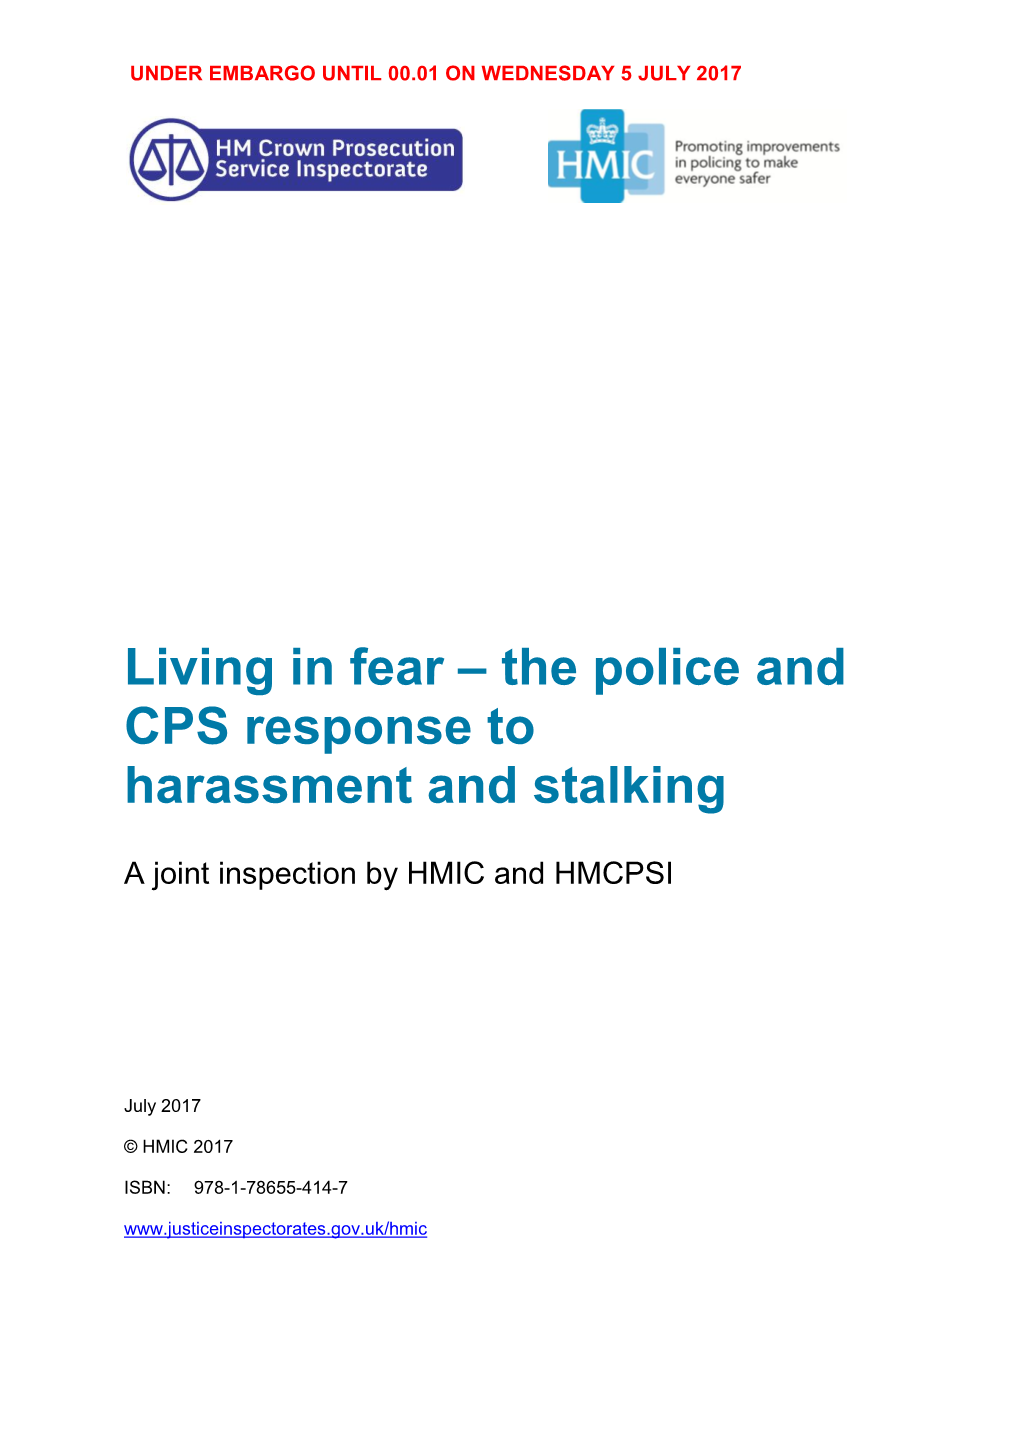 Living in Fear – the Police and CPS Response to Harassment and Stalking